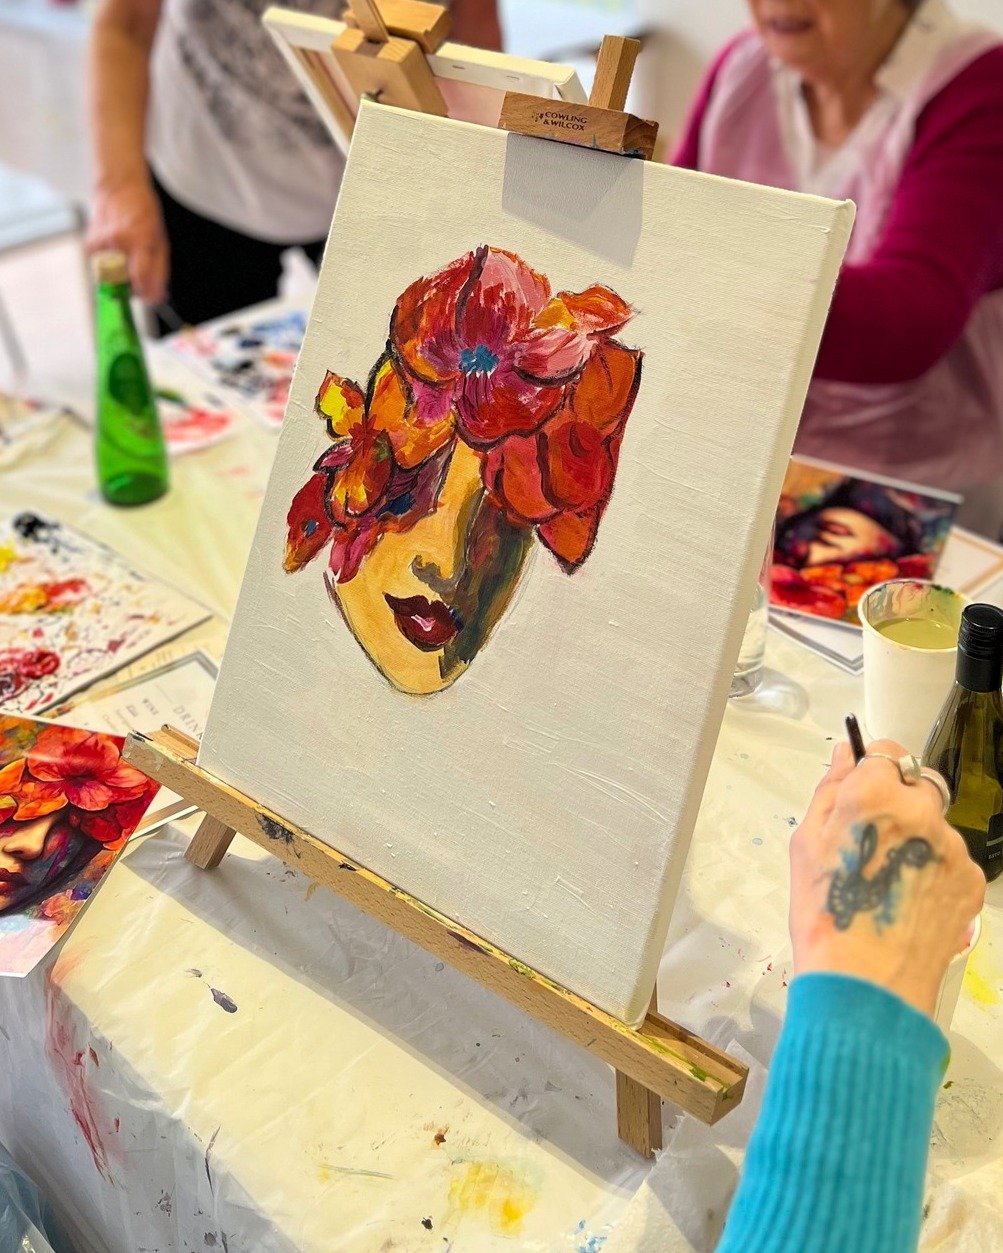 As we gear up for another creative weekend, remember that our workshops are designed with beginners in mind. It's all about having fun and trying something new. ✨ So why not join us and surprise yourself with what you can create? 🖌️

#NoExperienceNe